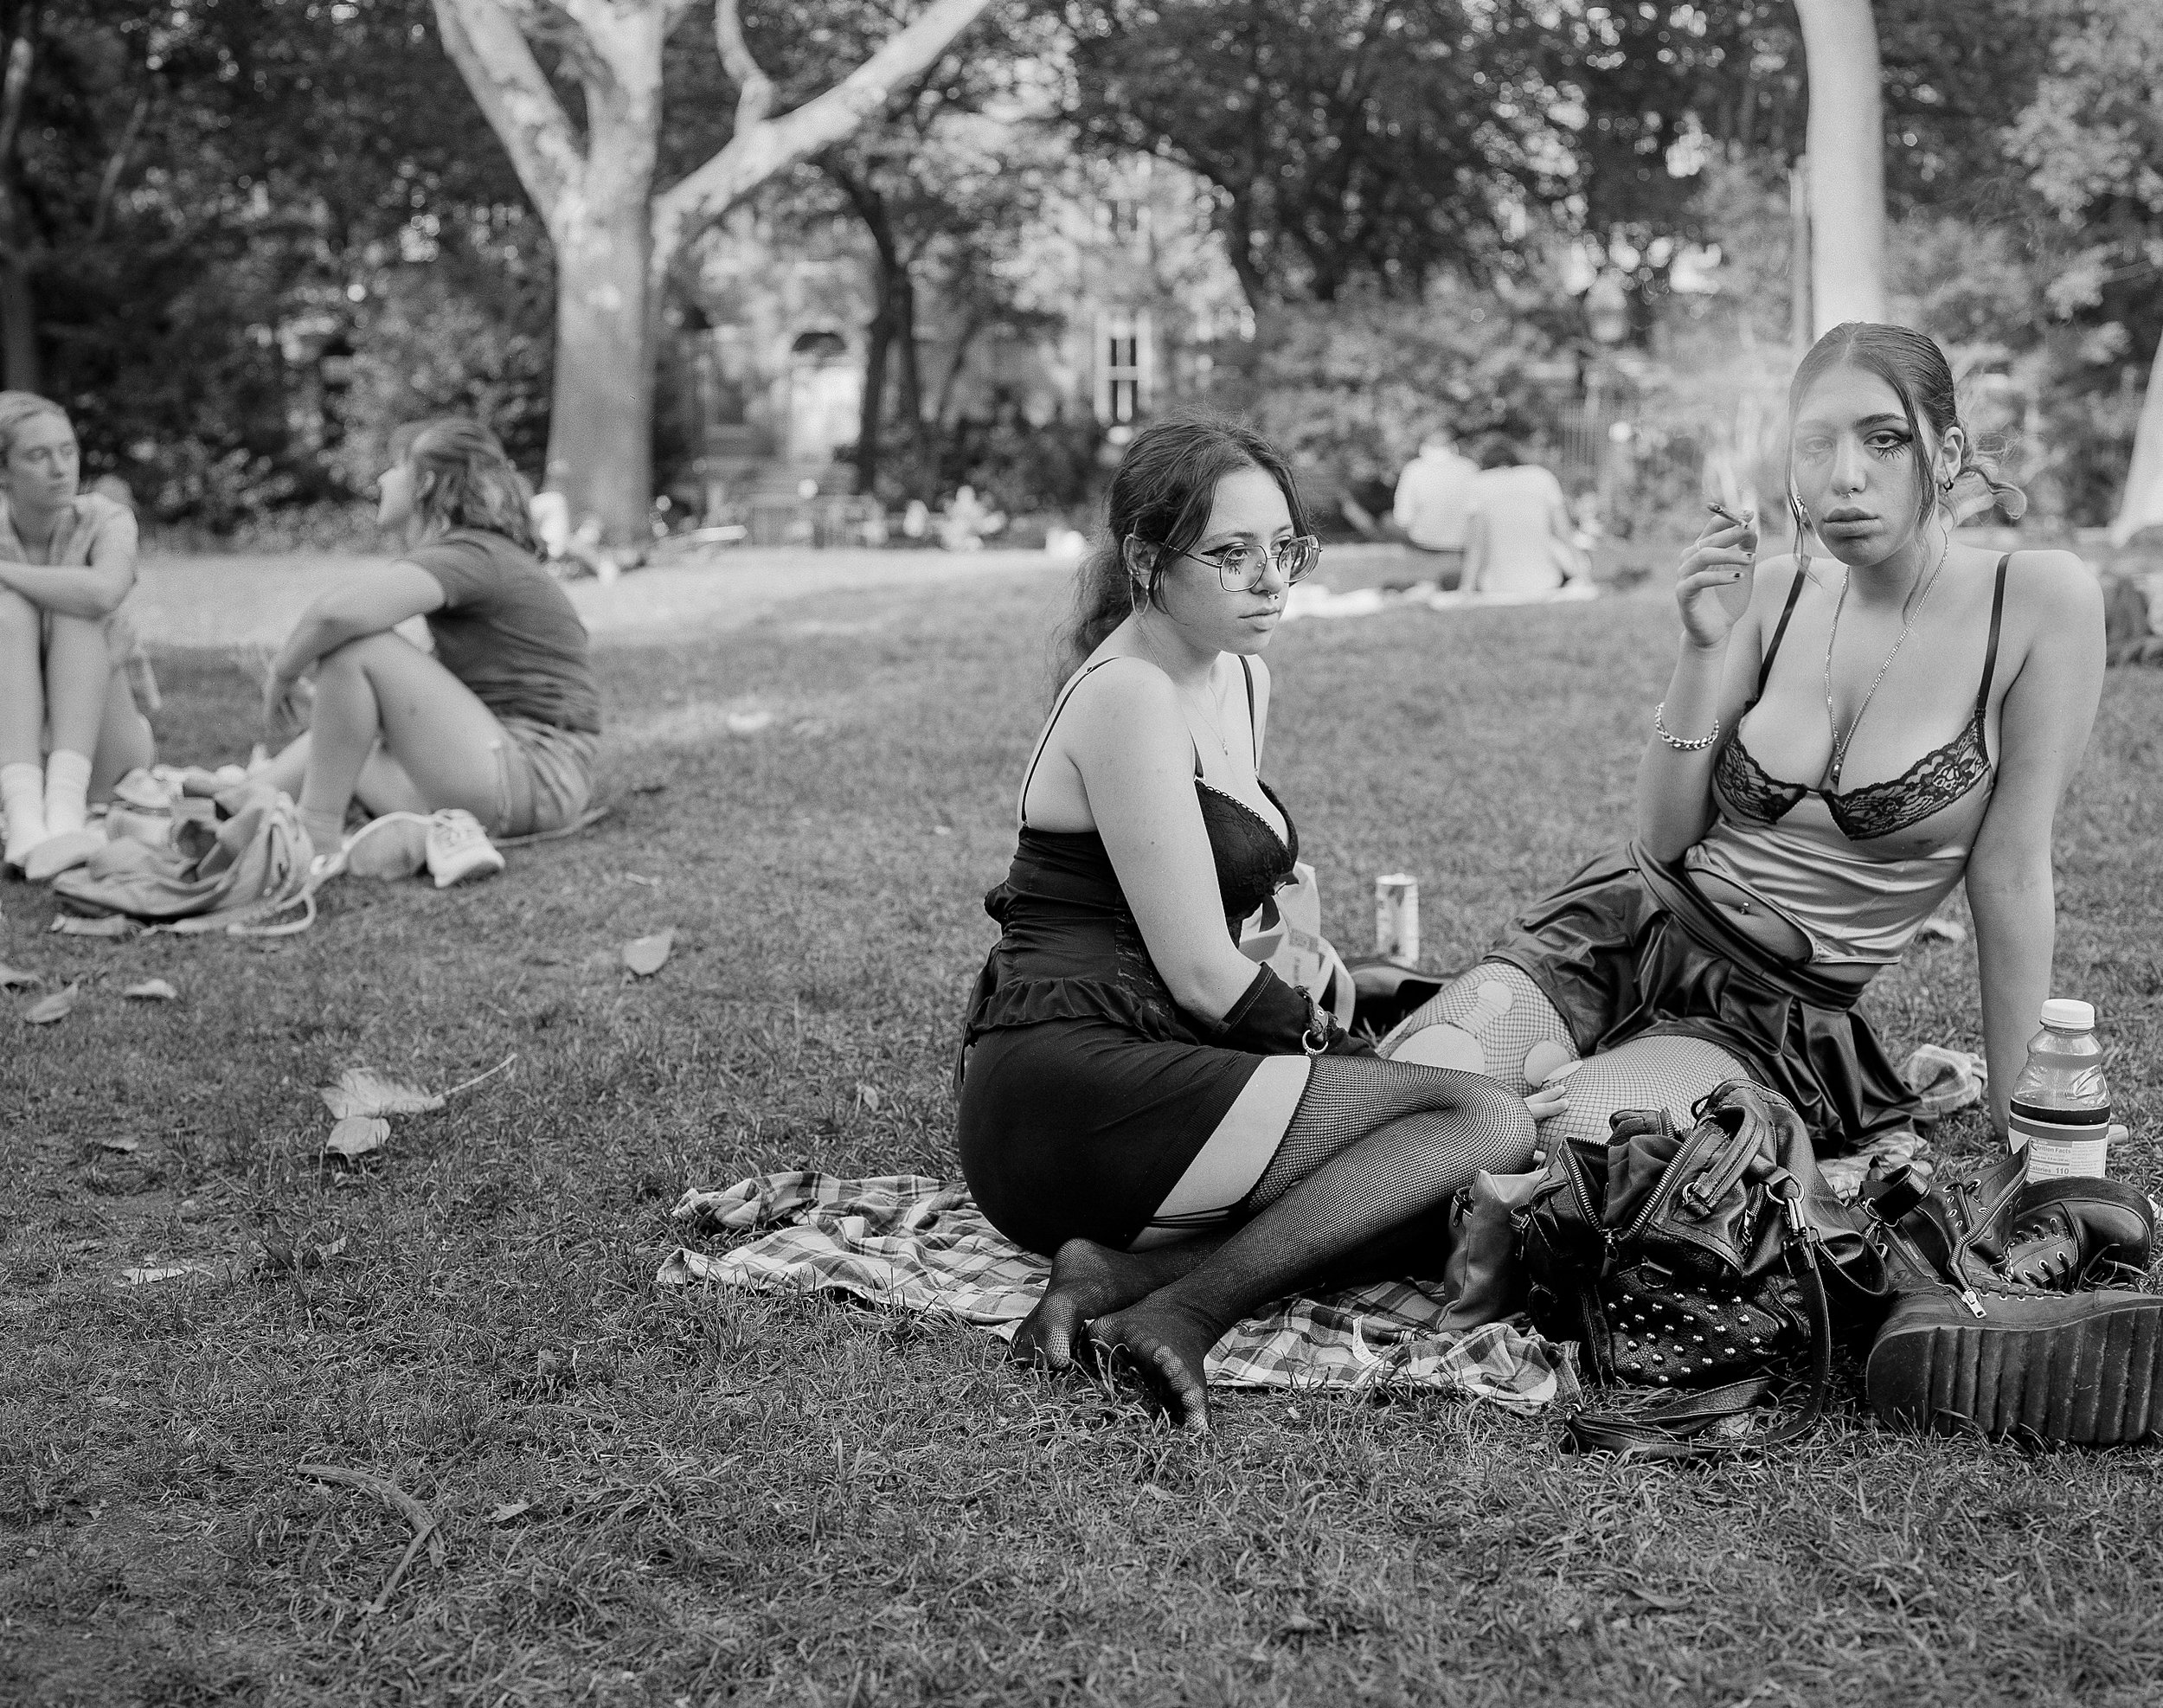  Ongoing project about teenagers who spend time at Washington Square Park. Through large format photography, this work aims to reflect on gender identities, femininity and community. 